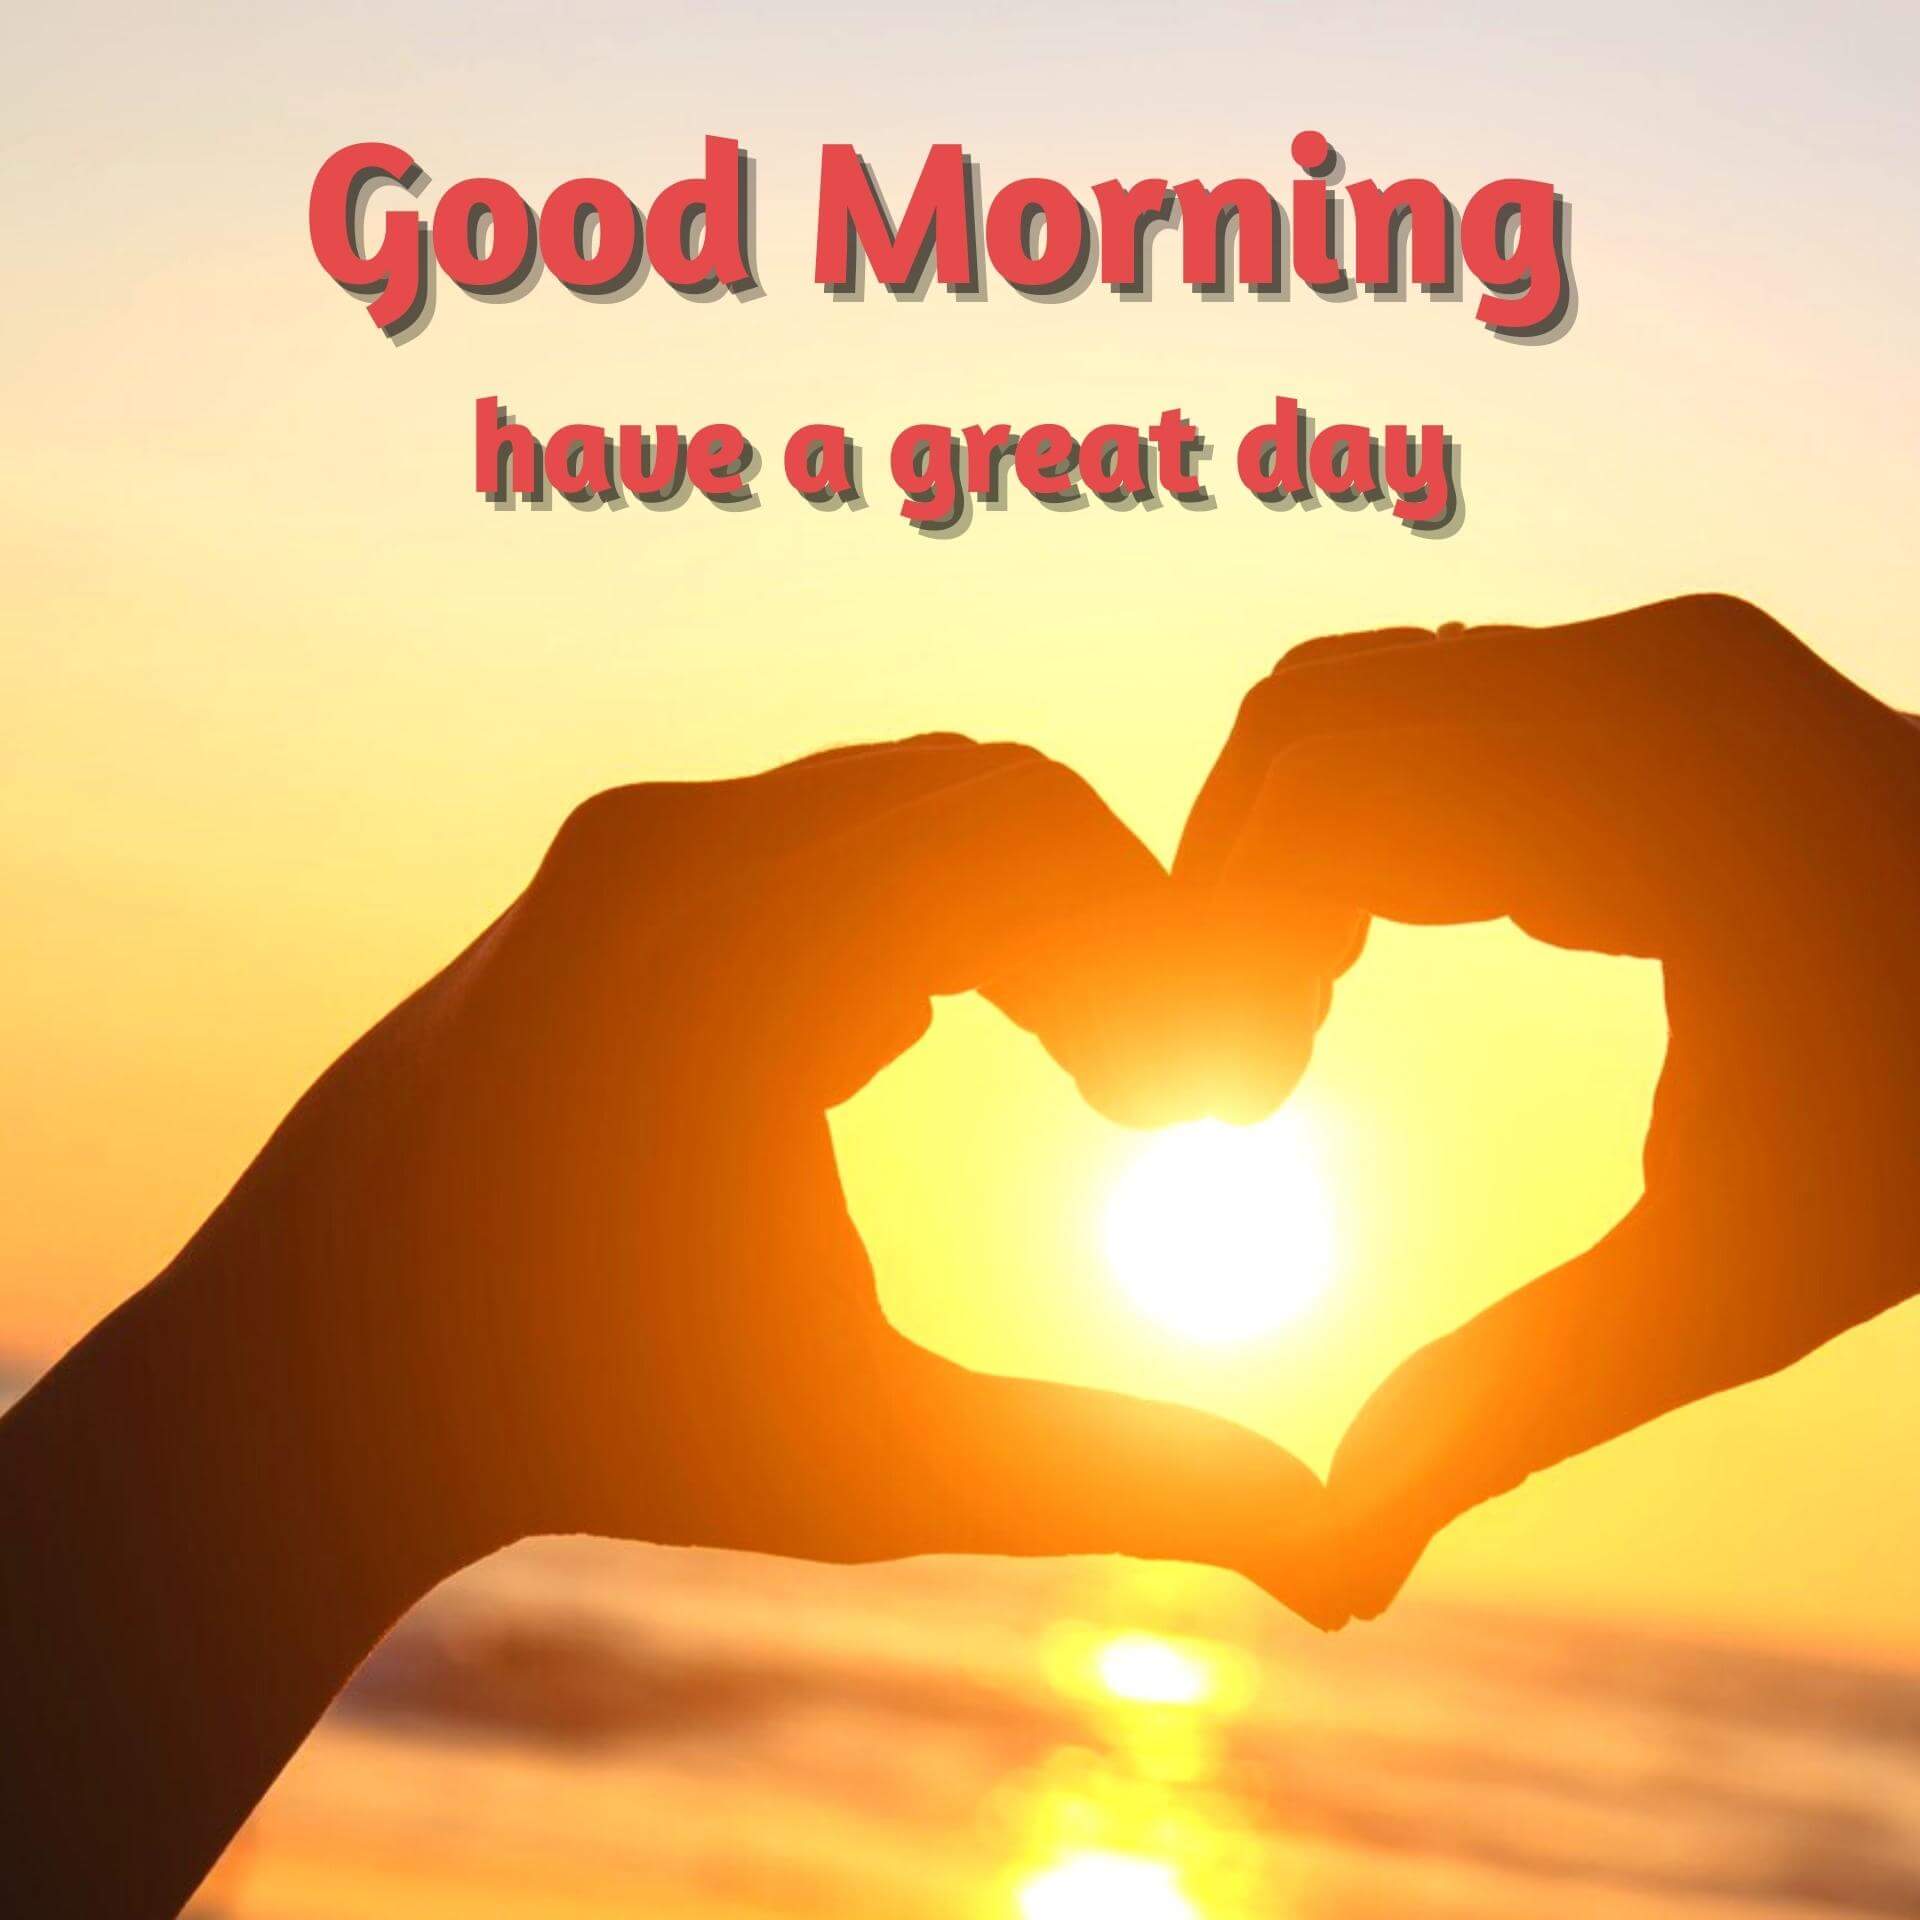 good morning message images free download